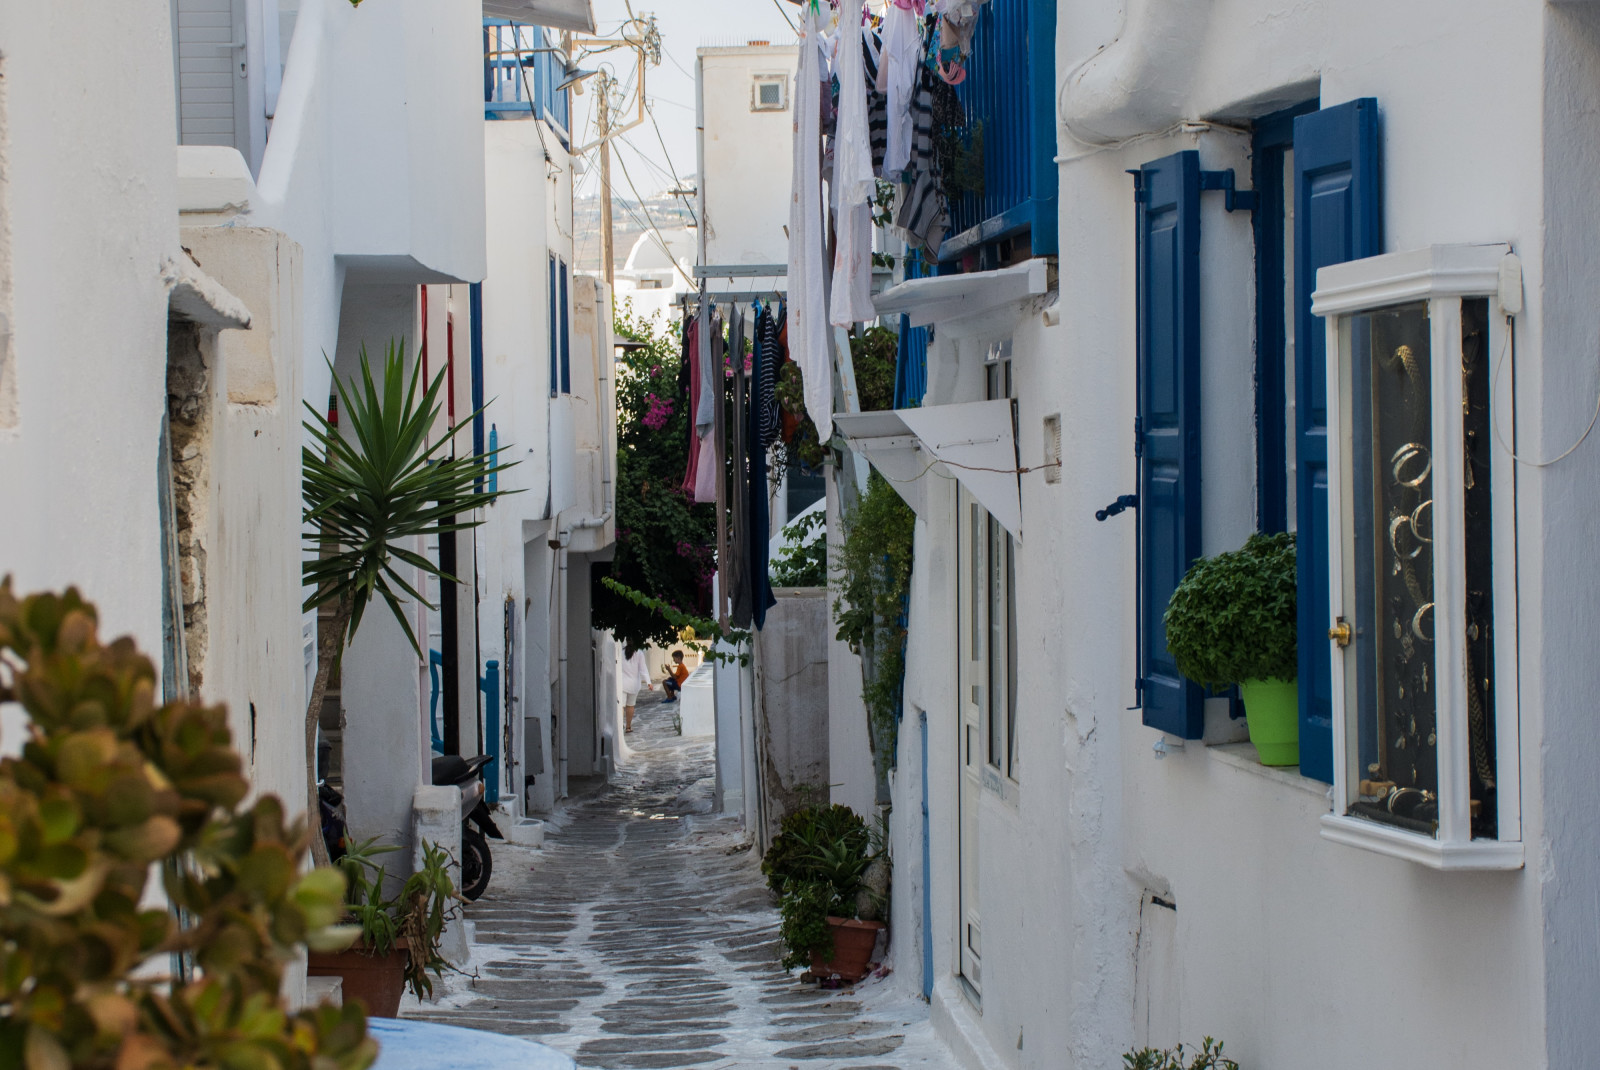 Street lined with white buildings and blue doors during daytime